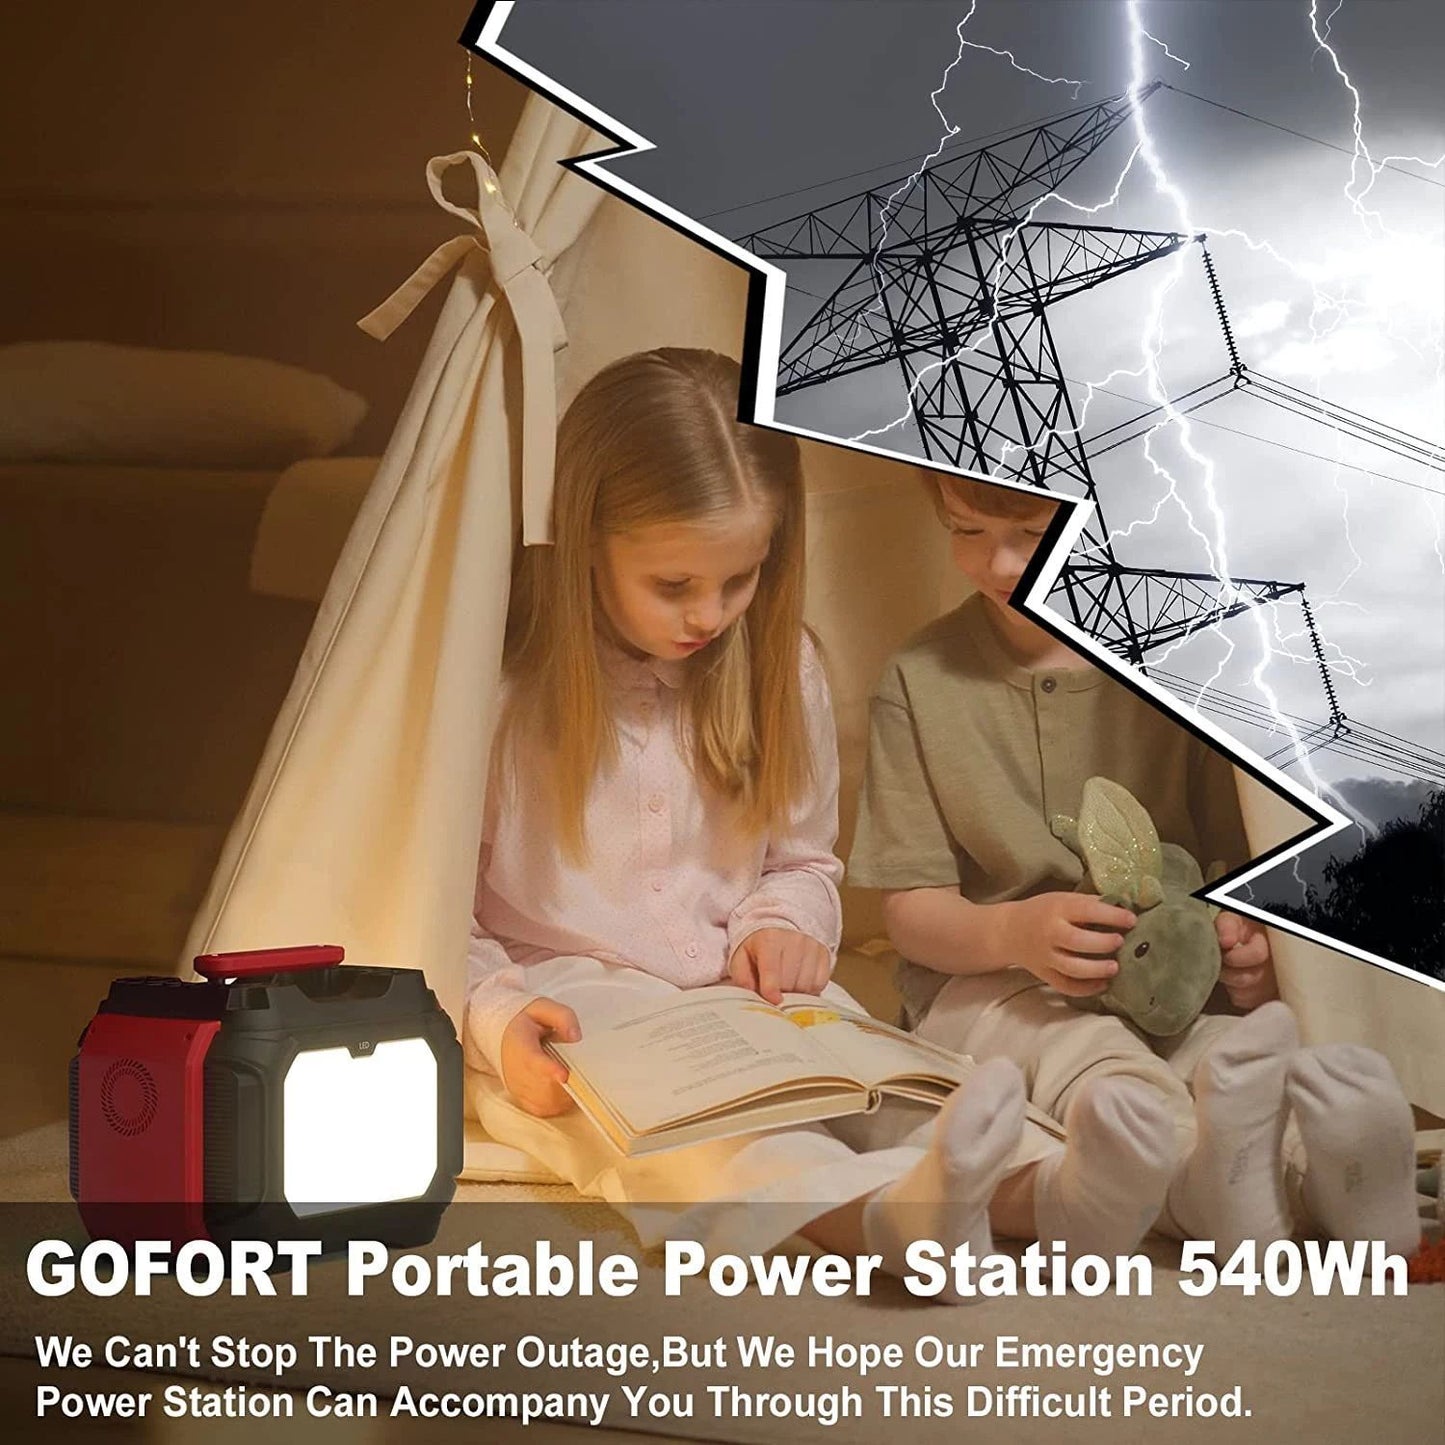 Portable Power Station 540Wh/500W(Peak 1000W) 6 x AC 110V Outlets PD 60W Portable Solar Generator CPAP Battery Power Outage Supplies Emergency Backup Power for Outdoor RV/Van Camping Fishing